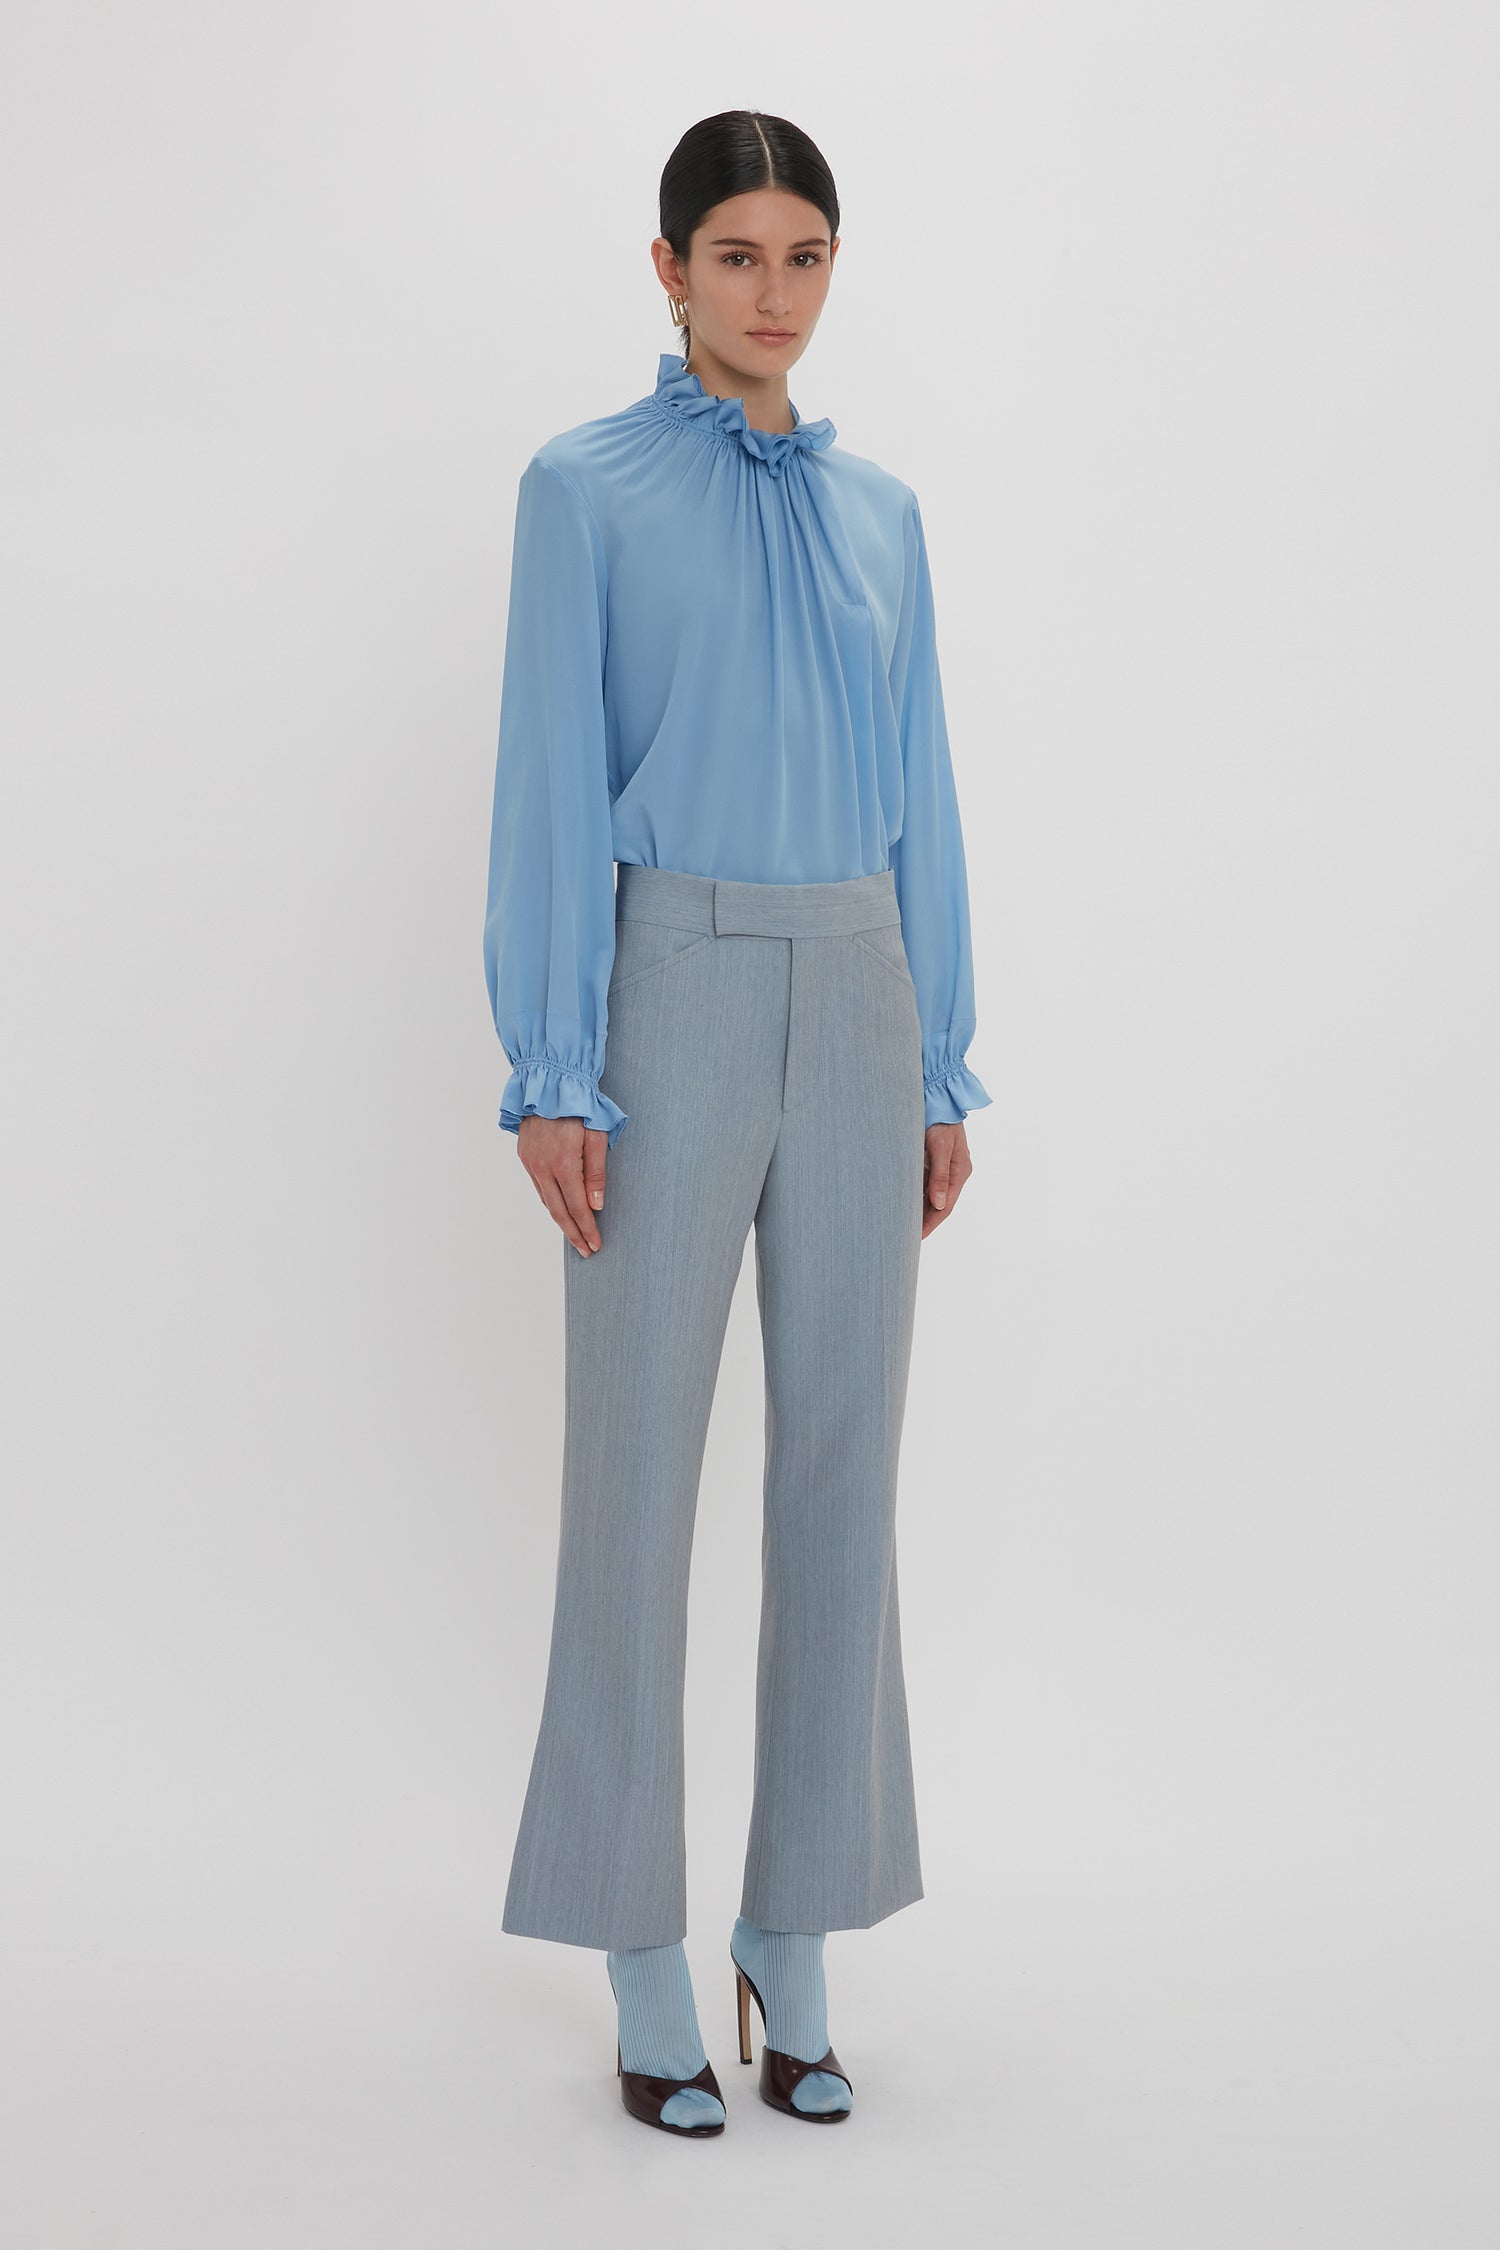 A person stands against a plain background, wearing the Victoria Beckham Exclusive Ruffle Neck Blouse In Cornflower Blue, paired with high-waisted, light gray pants and matching cornflower blue heels.